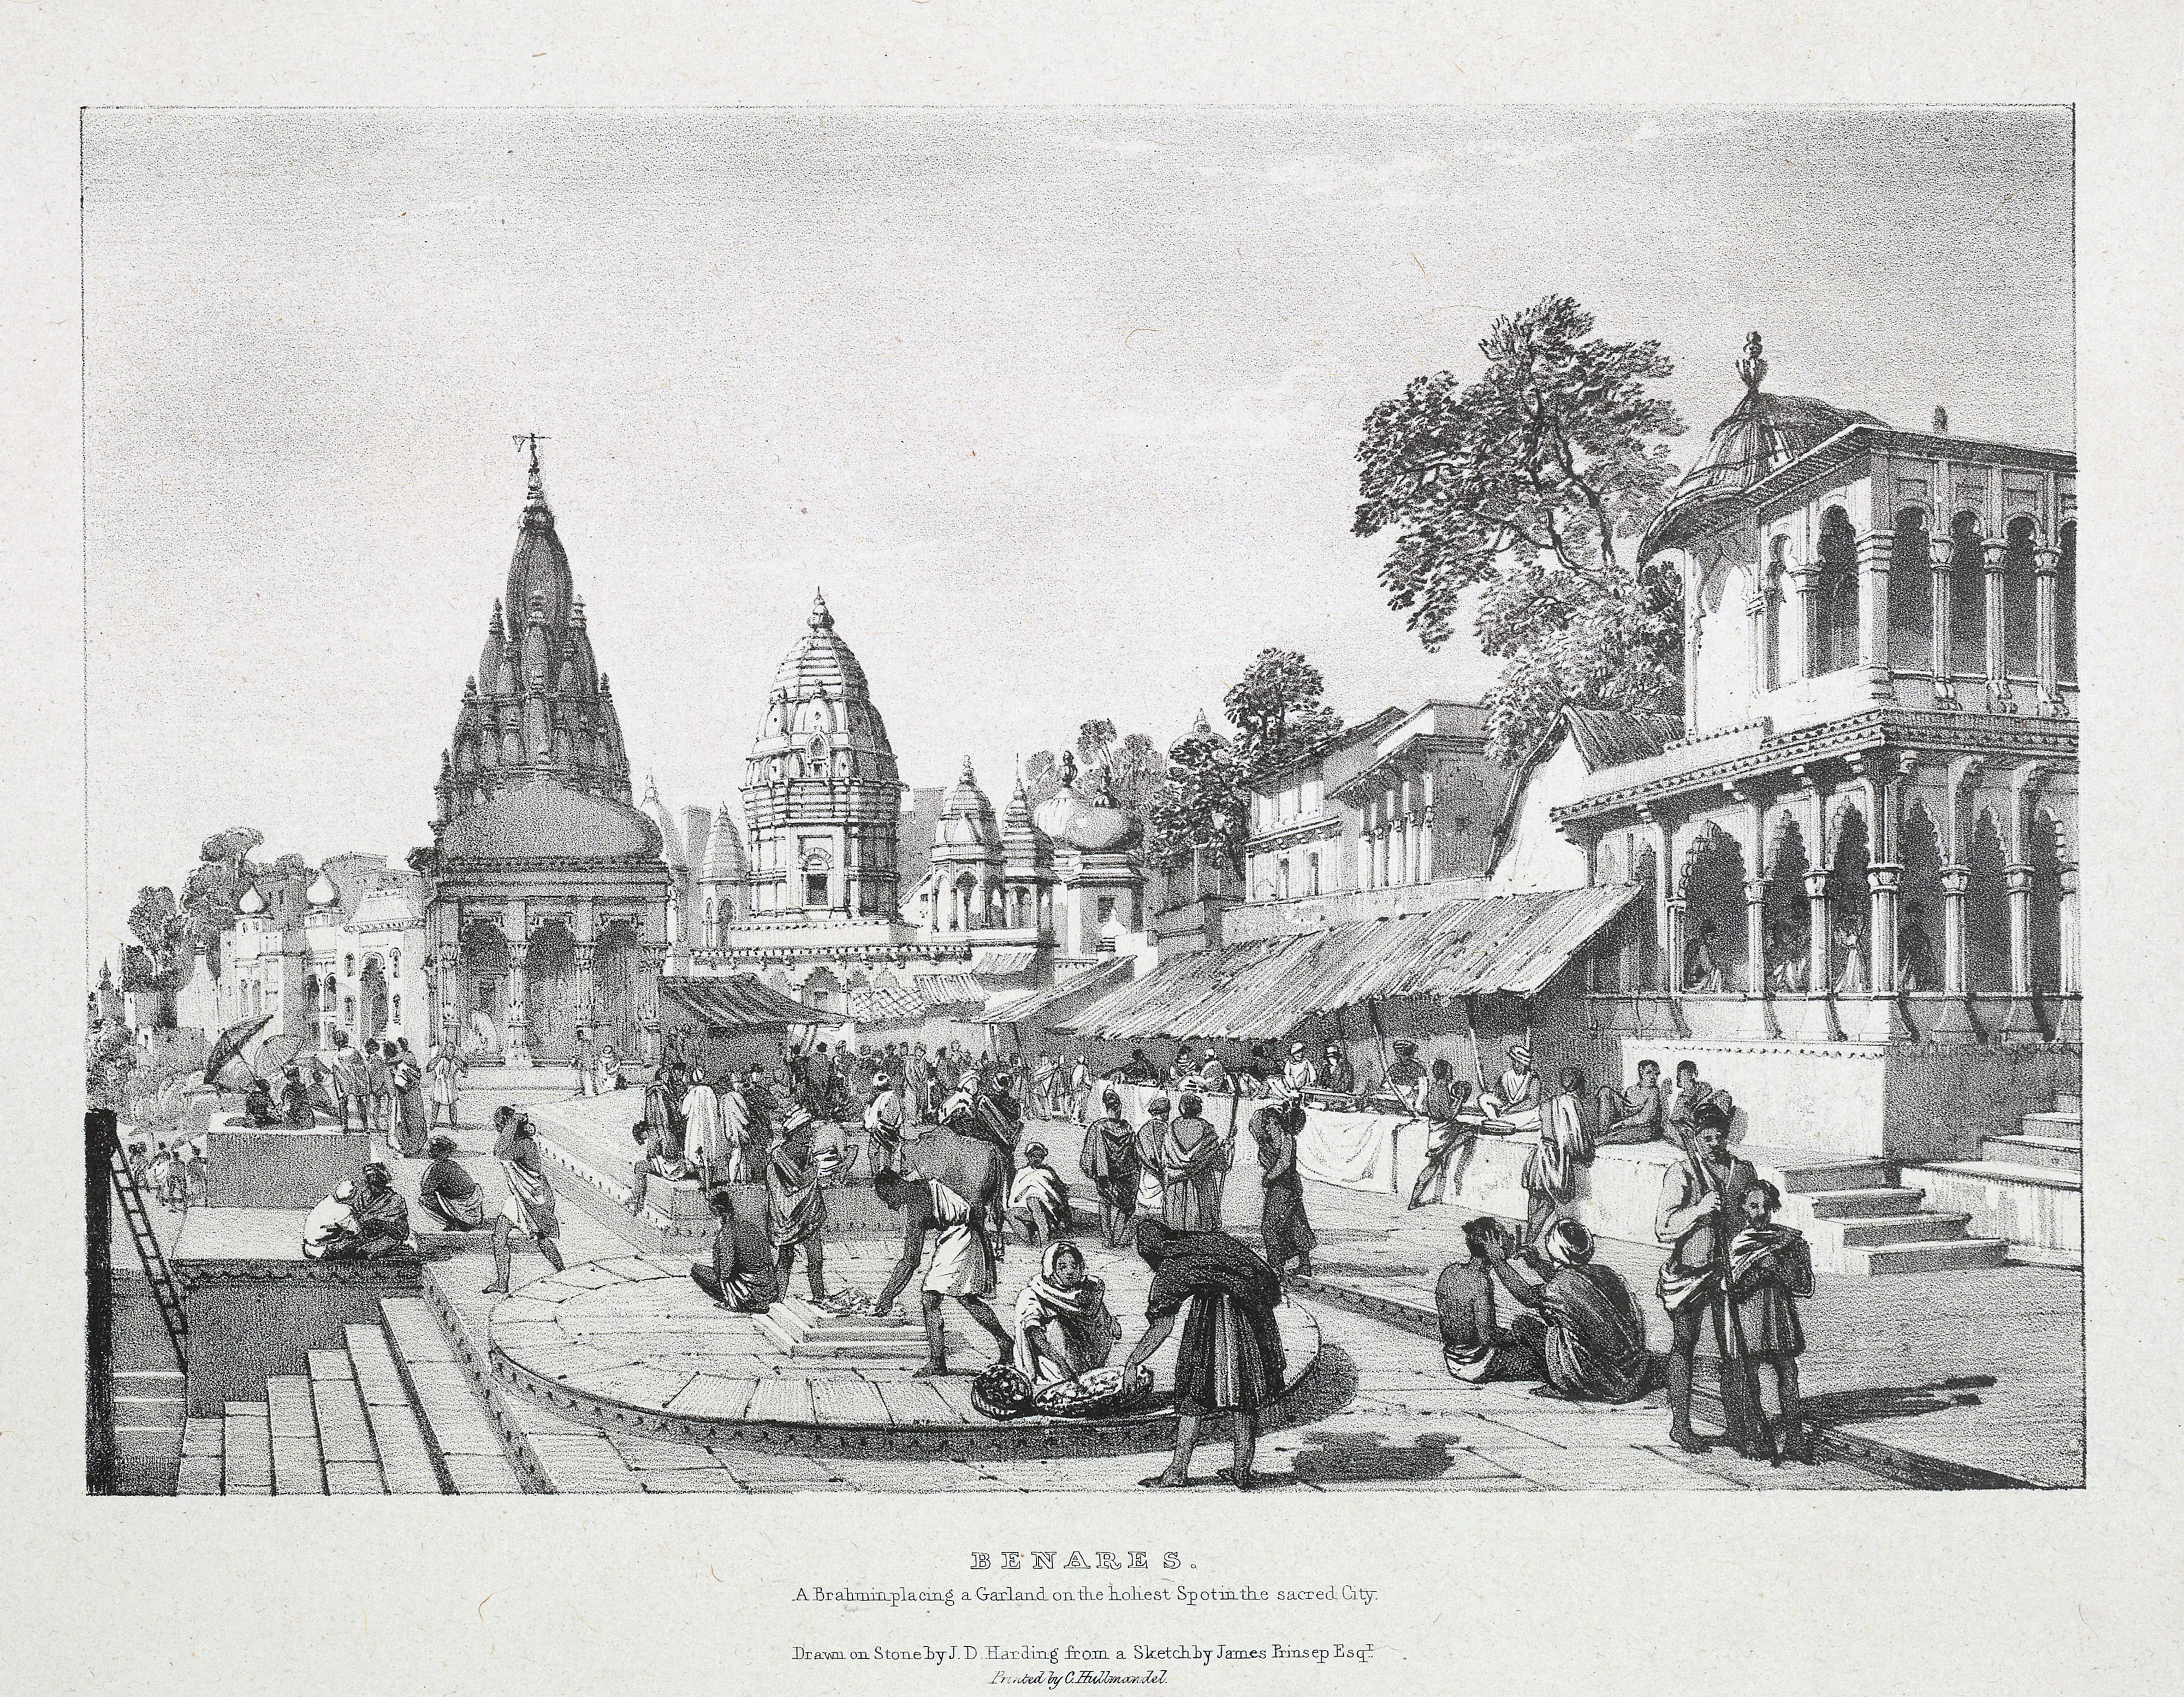 Benares_A_Brahmin_placing_a_garland_on_the_holiest_spot_in_the_sacred_city_by_James_Prinsep_1832.jpg